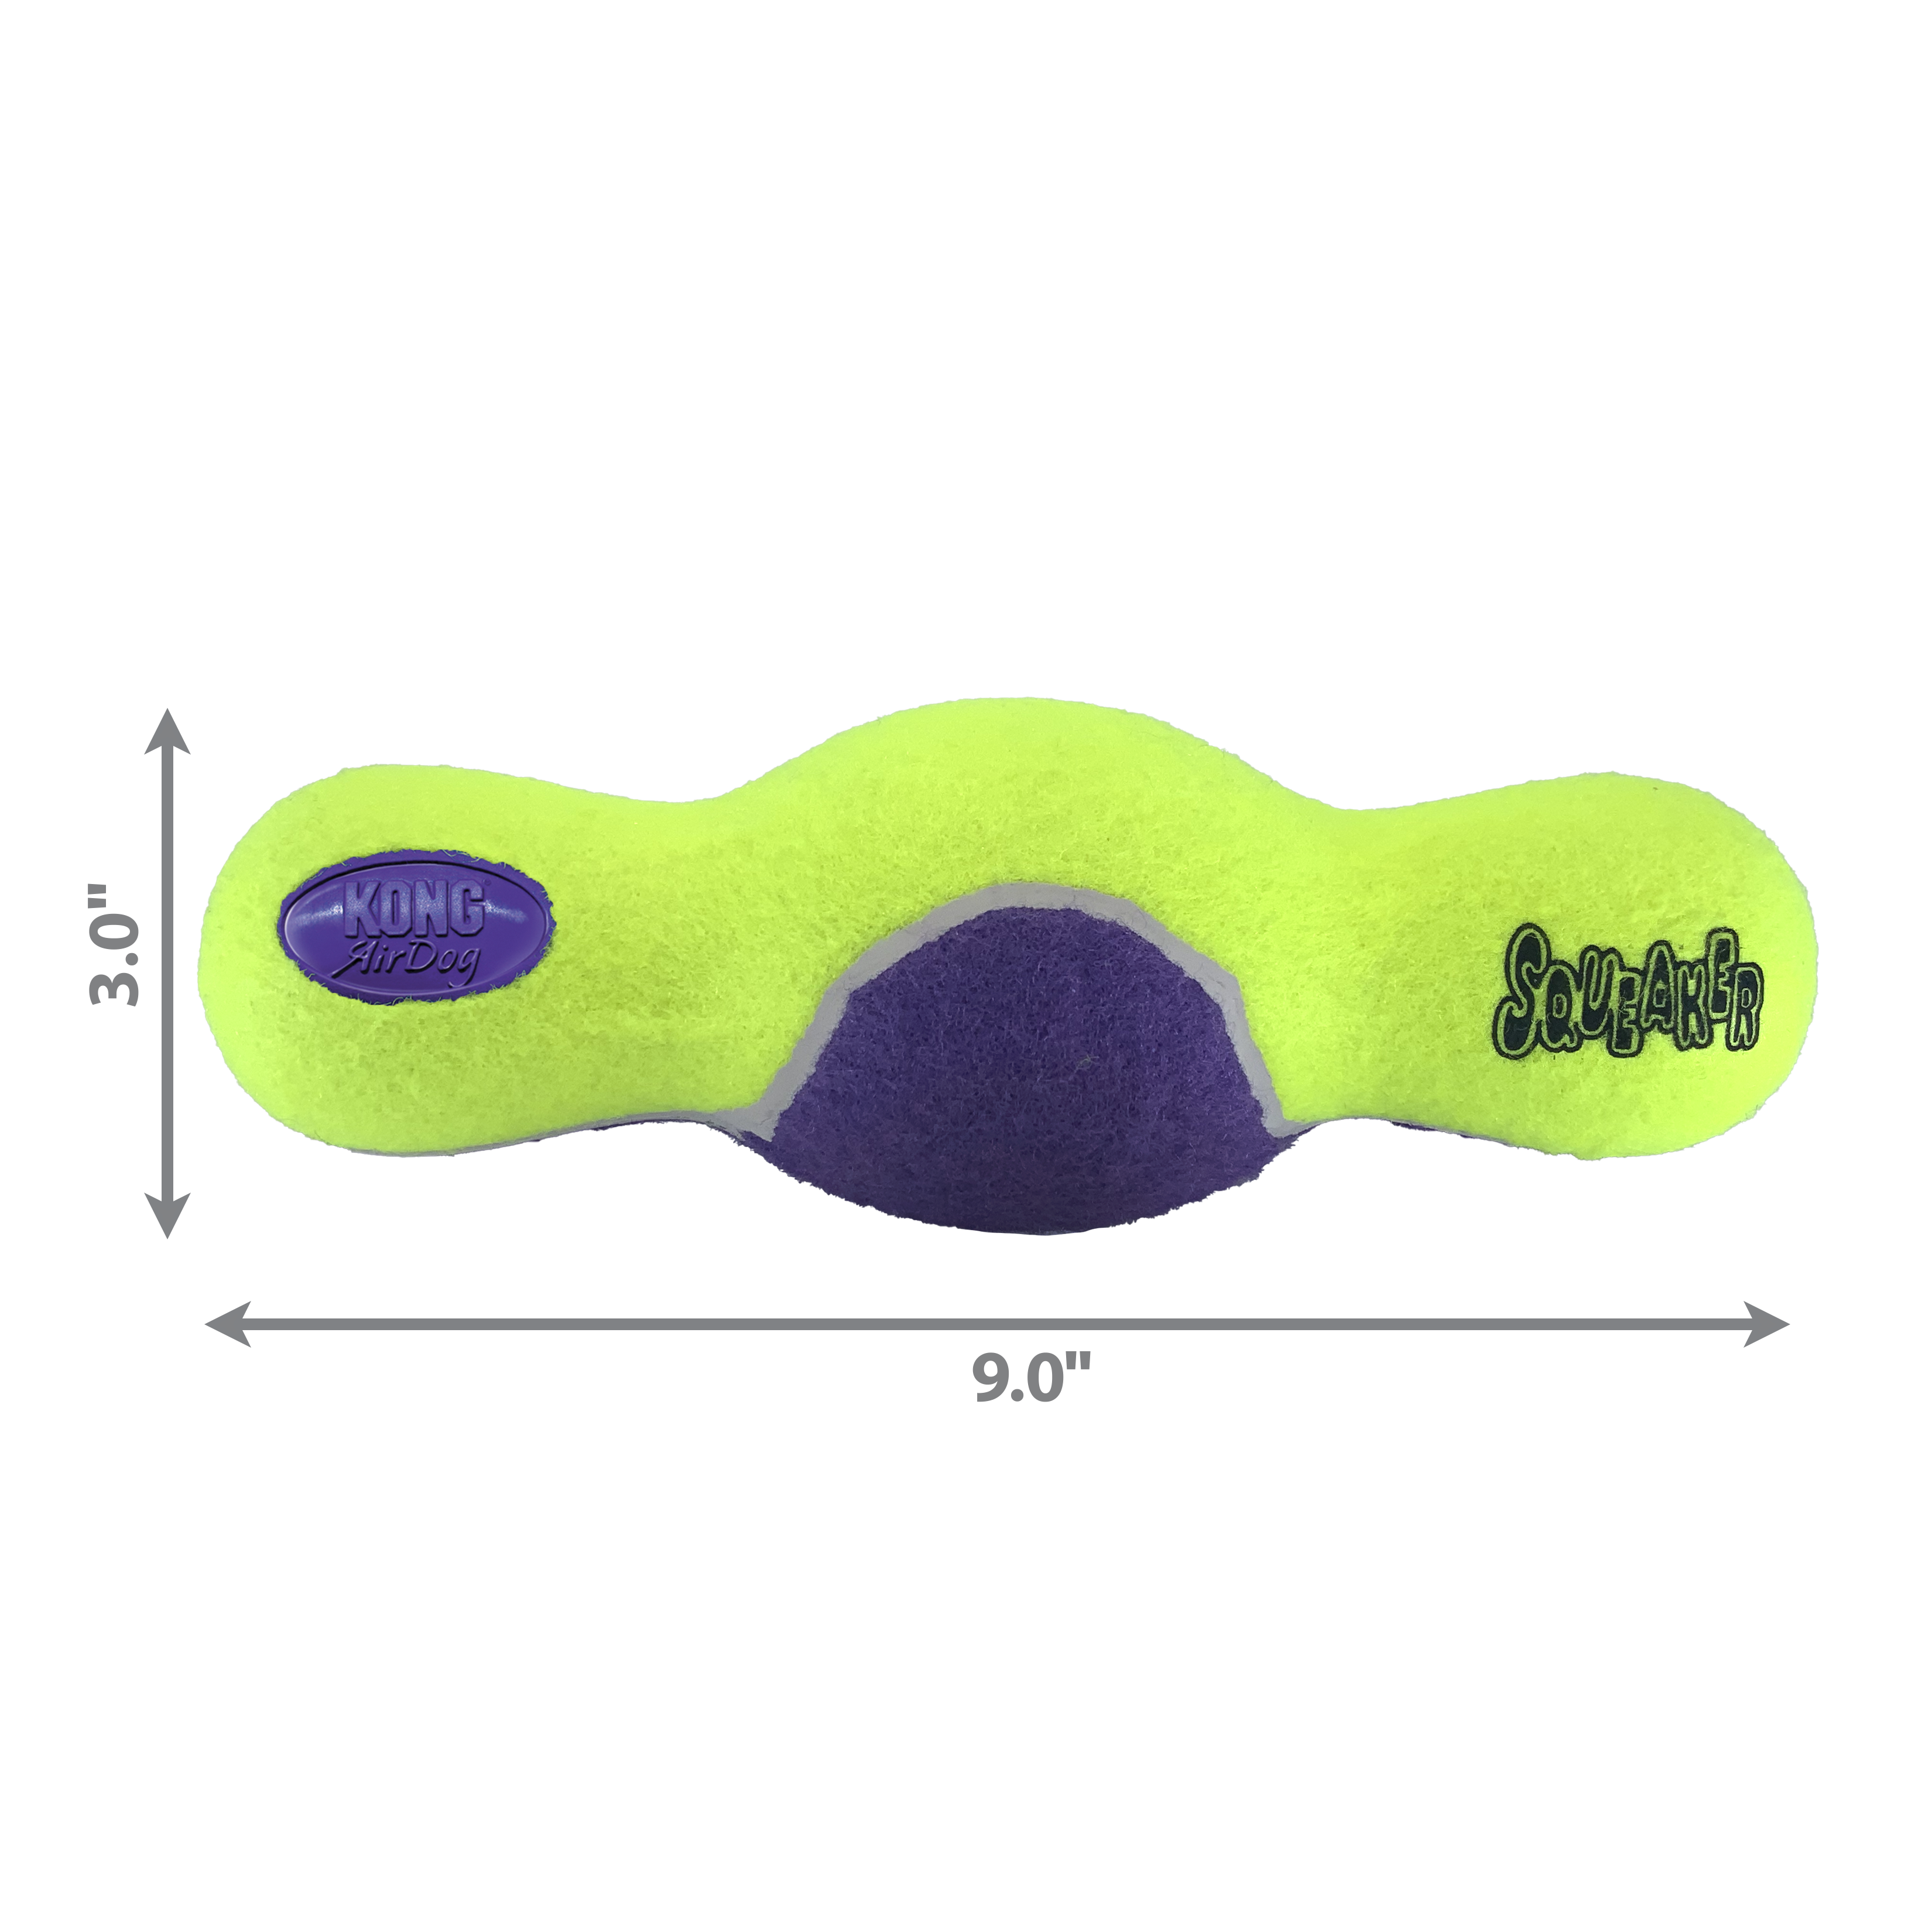 AirDog Squeaker Roller dimoffpack product image